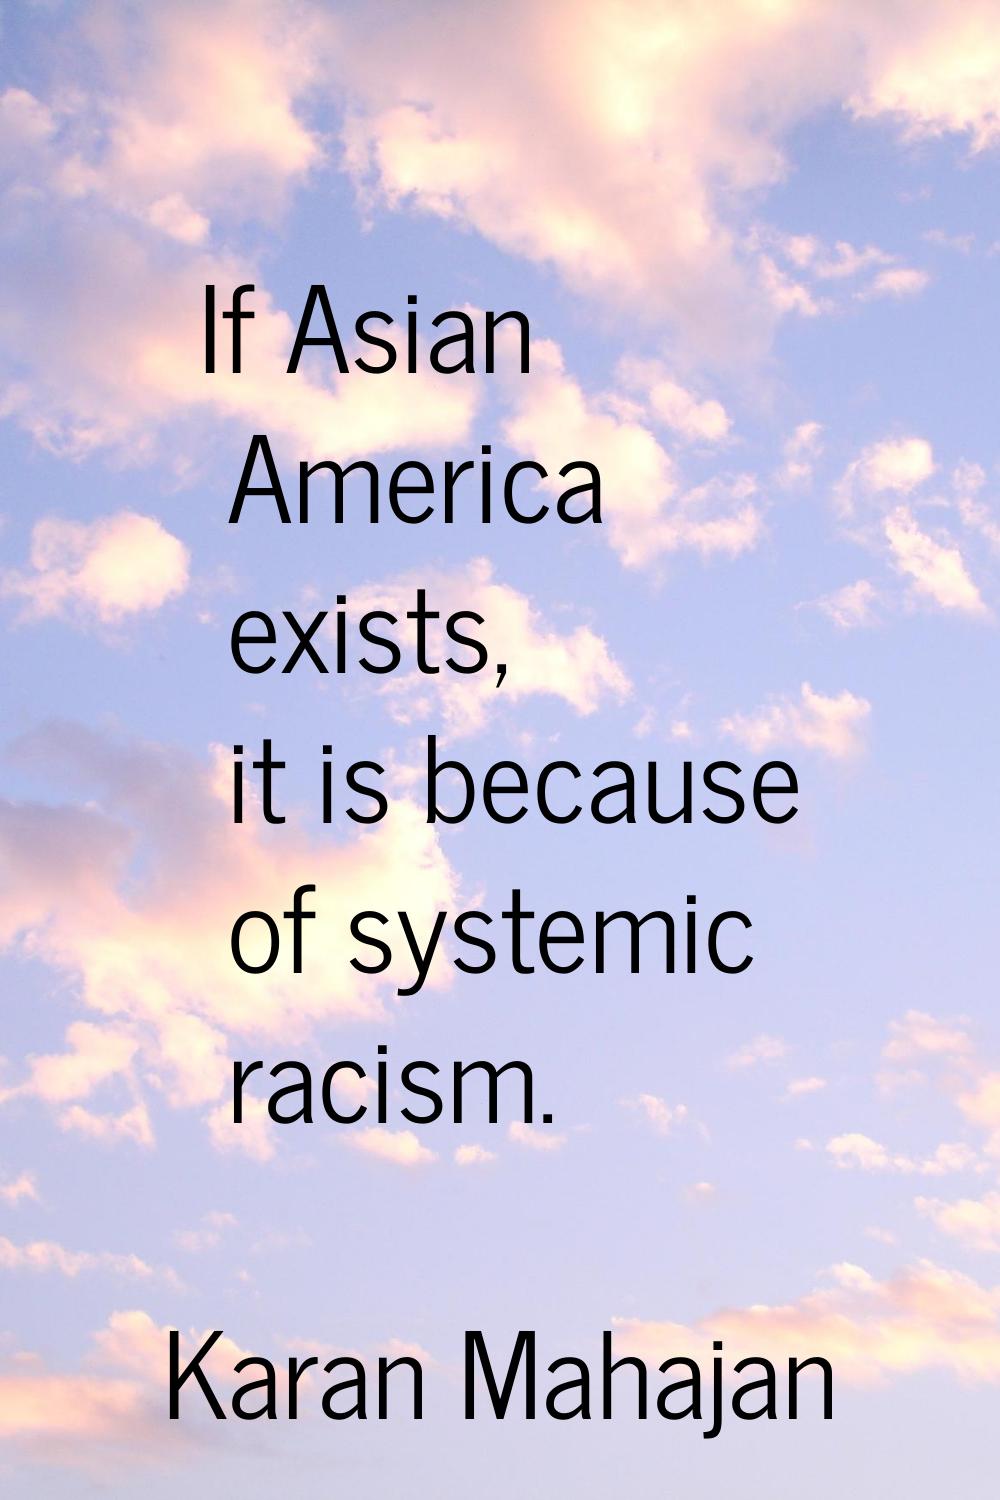 If Asian America exists, it is because of systemic racism.